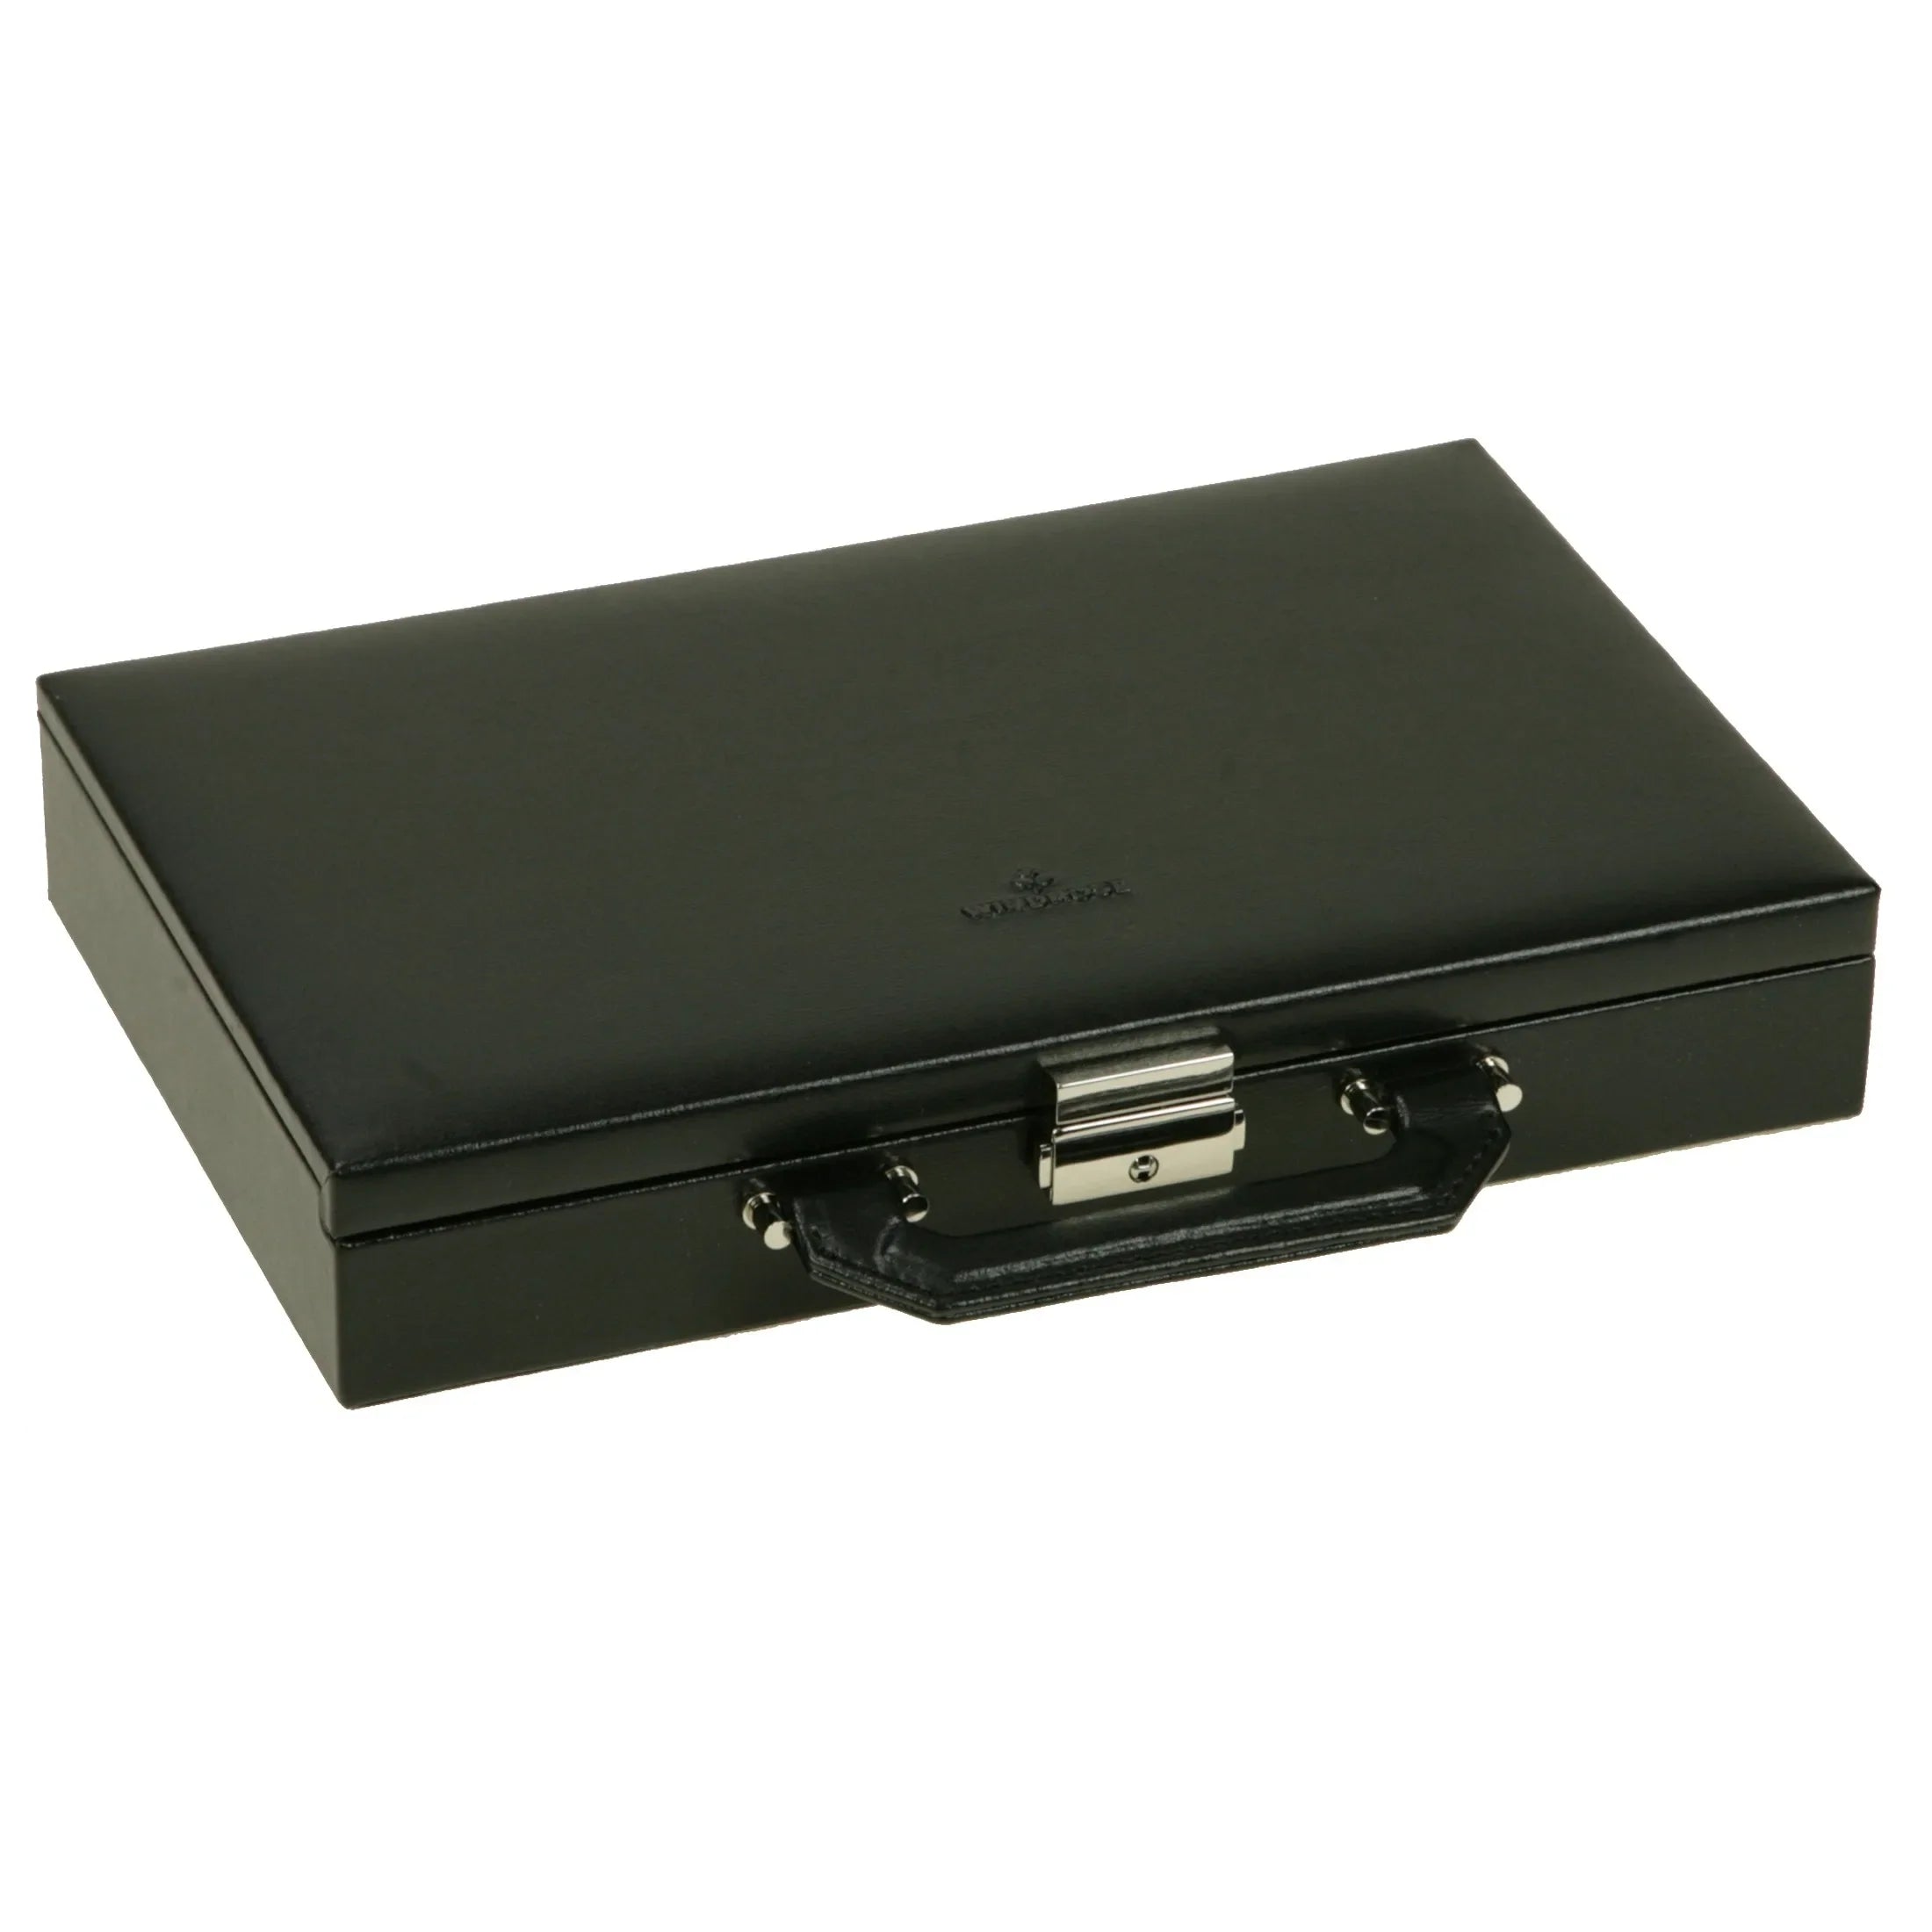 Windrose Ambiance safe case for leather rings - black